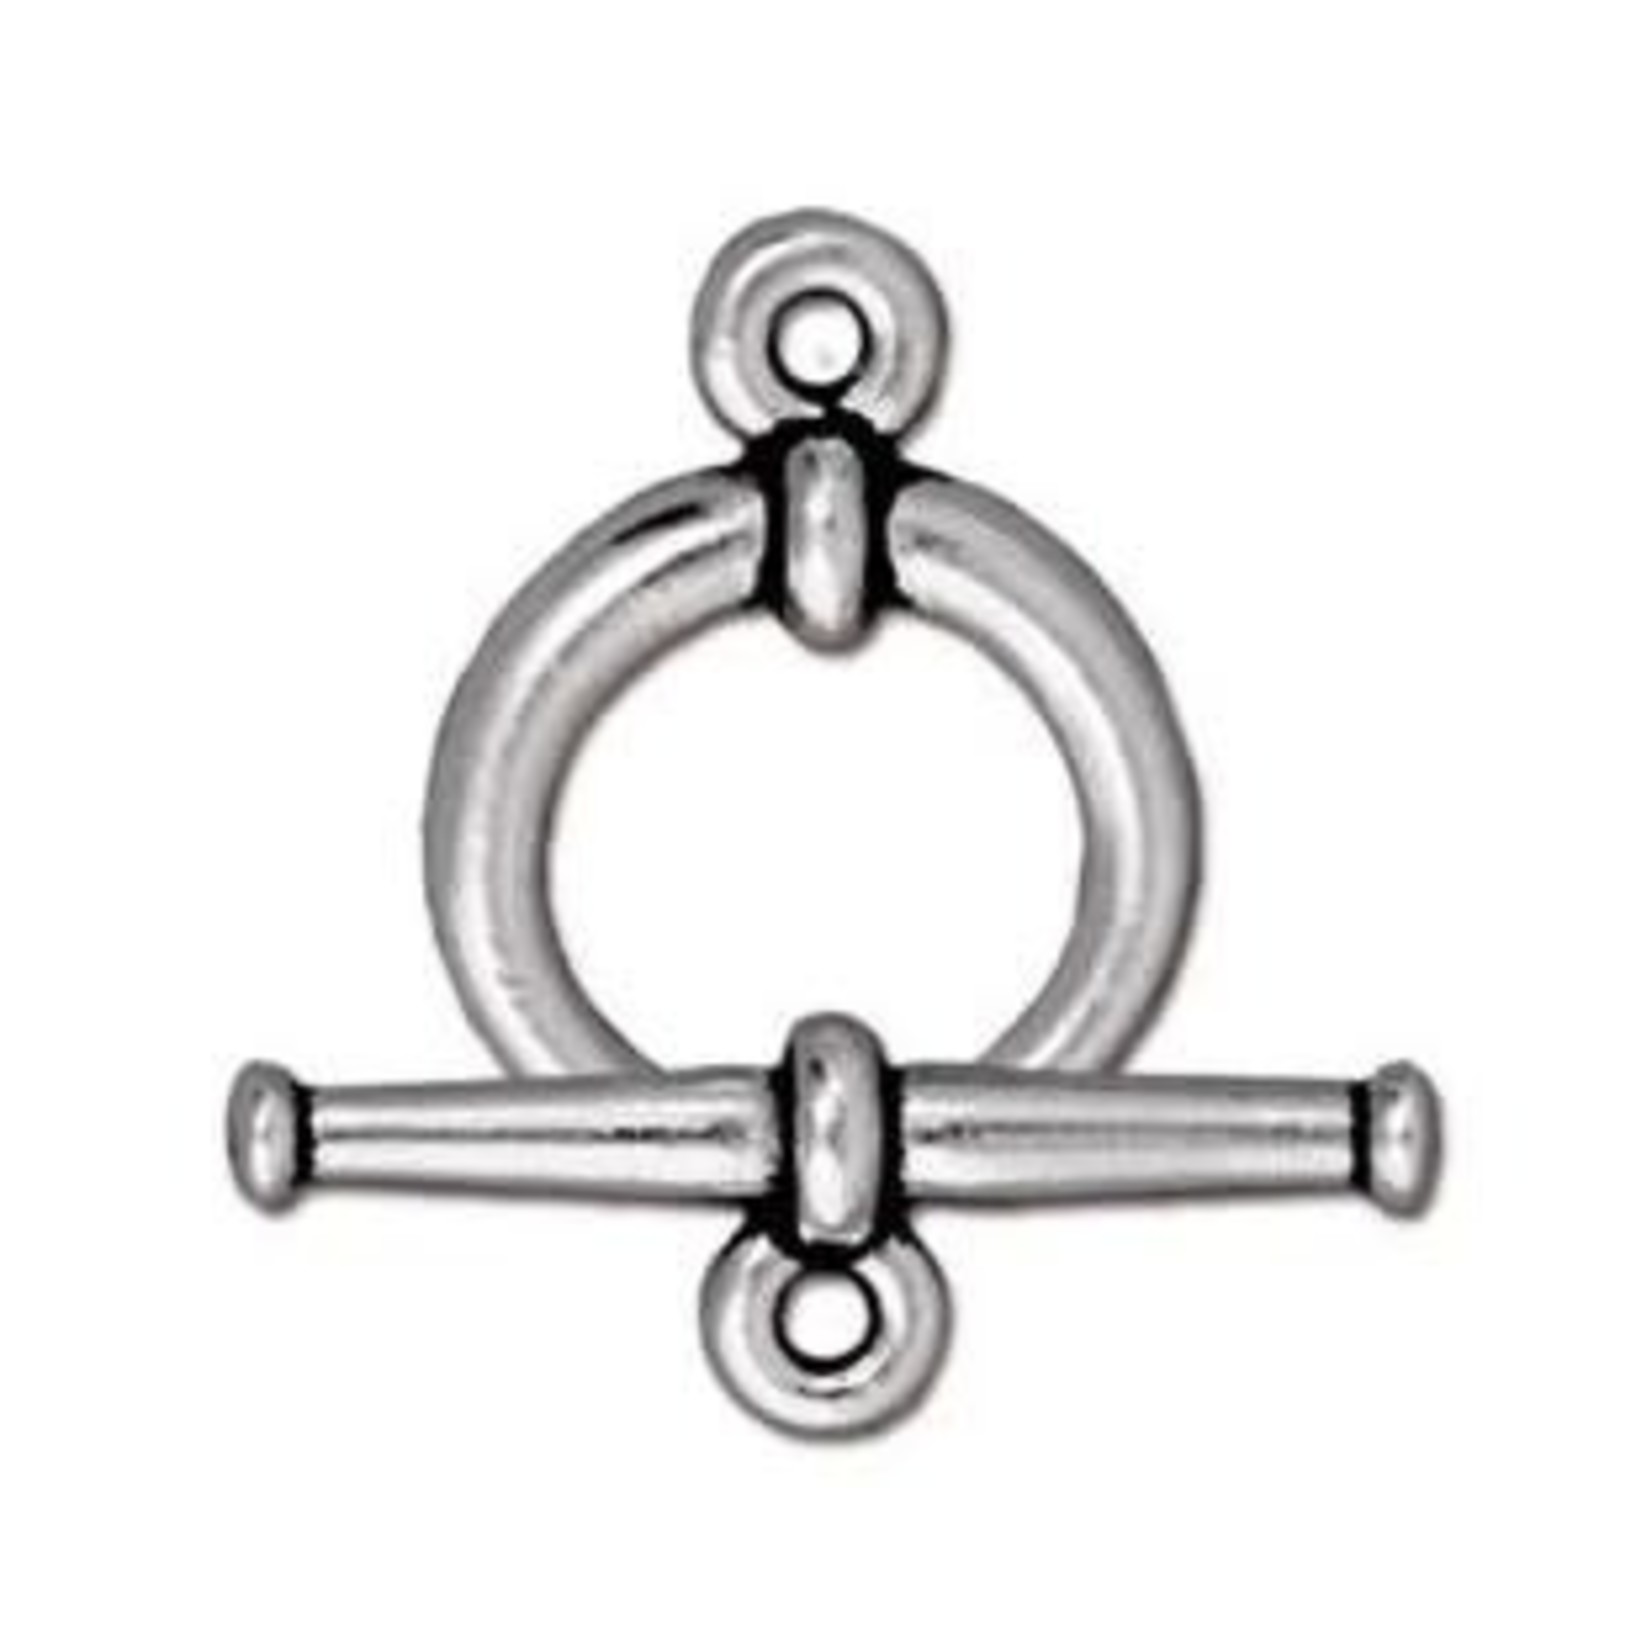 TierraCast Tierracast Antique Silver Plated Large Toggle Clasp Set